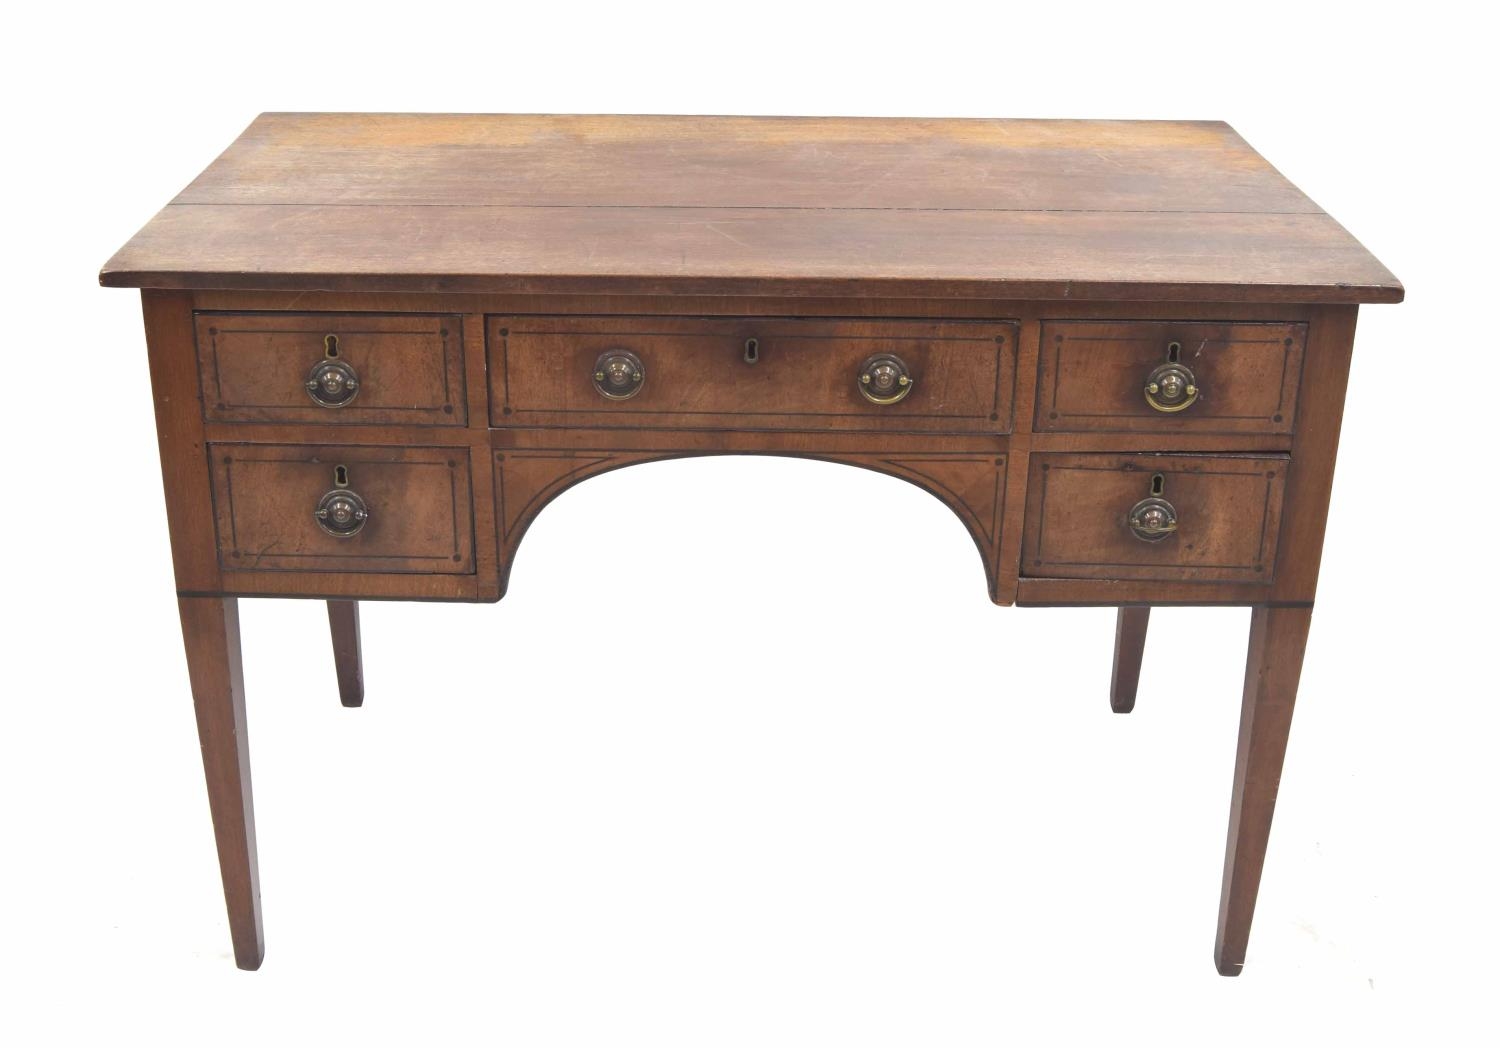 Regency mahogany kneehole writing desk, the top over one long drawer to the kneehole frieze